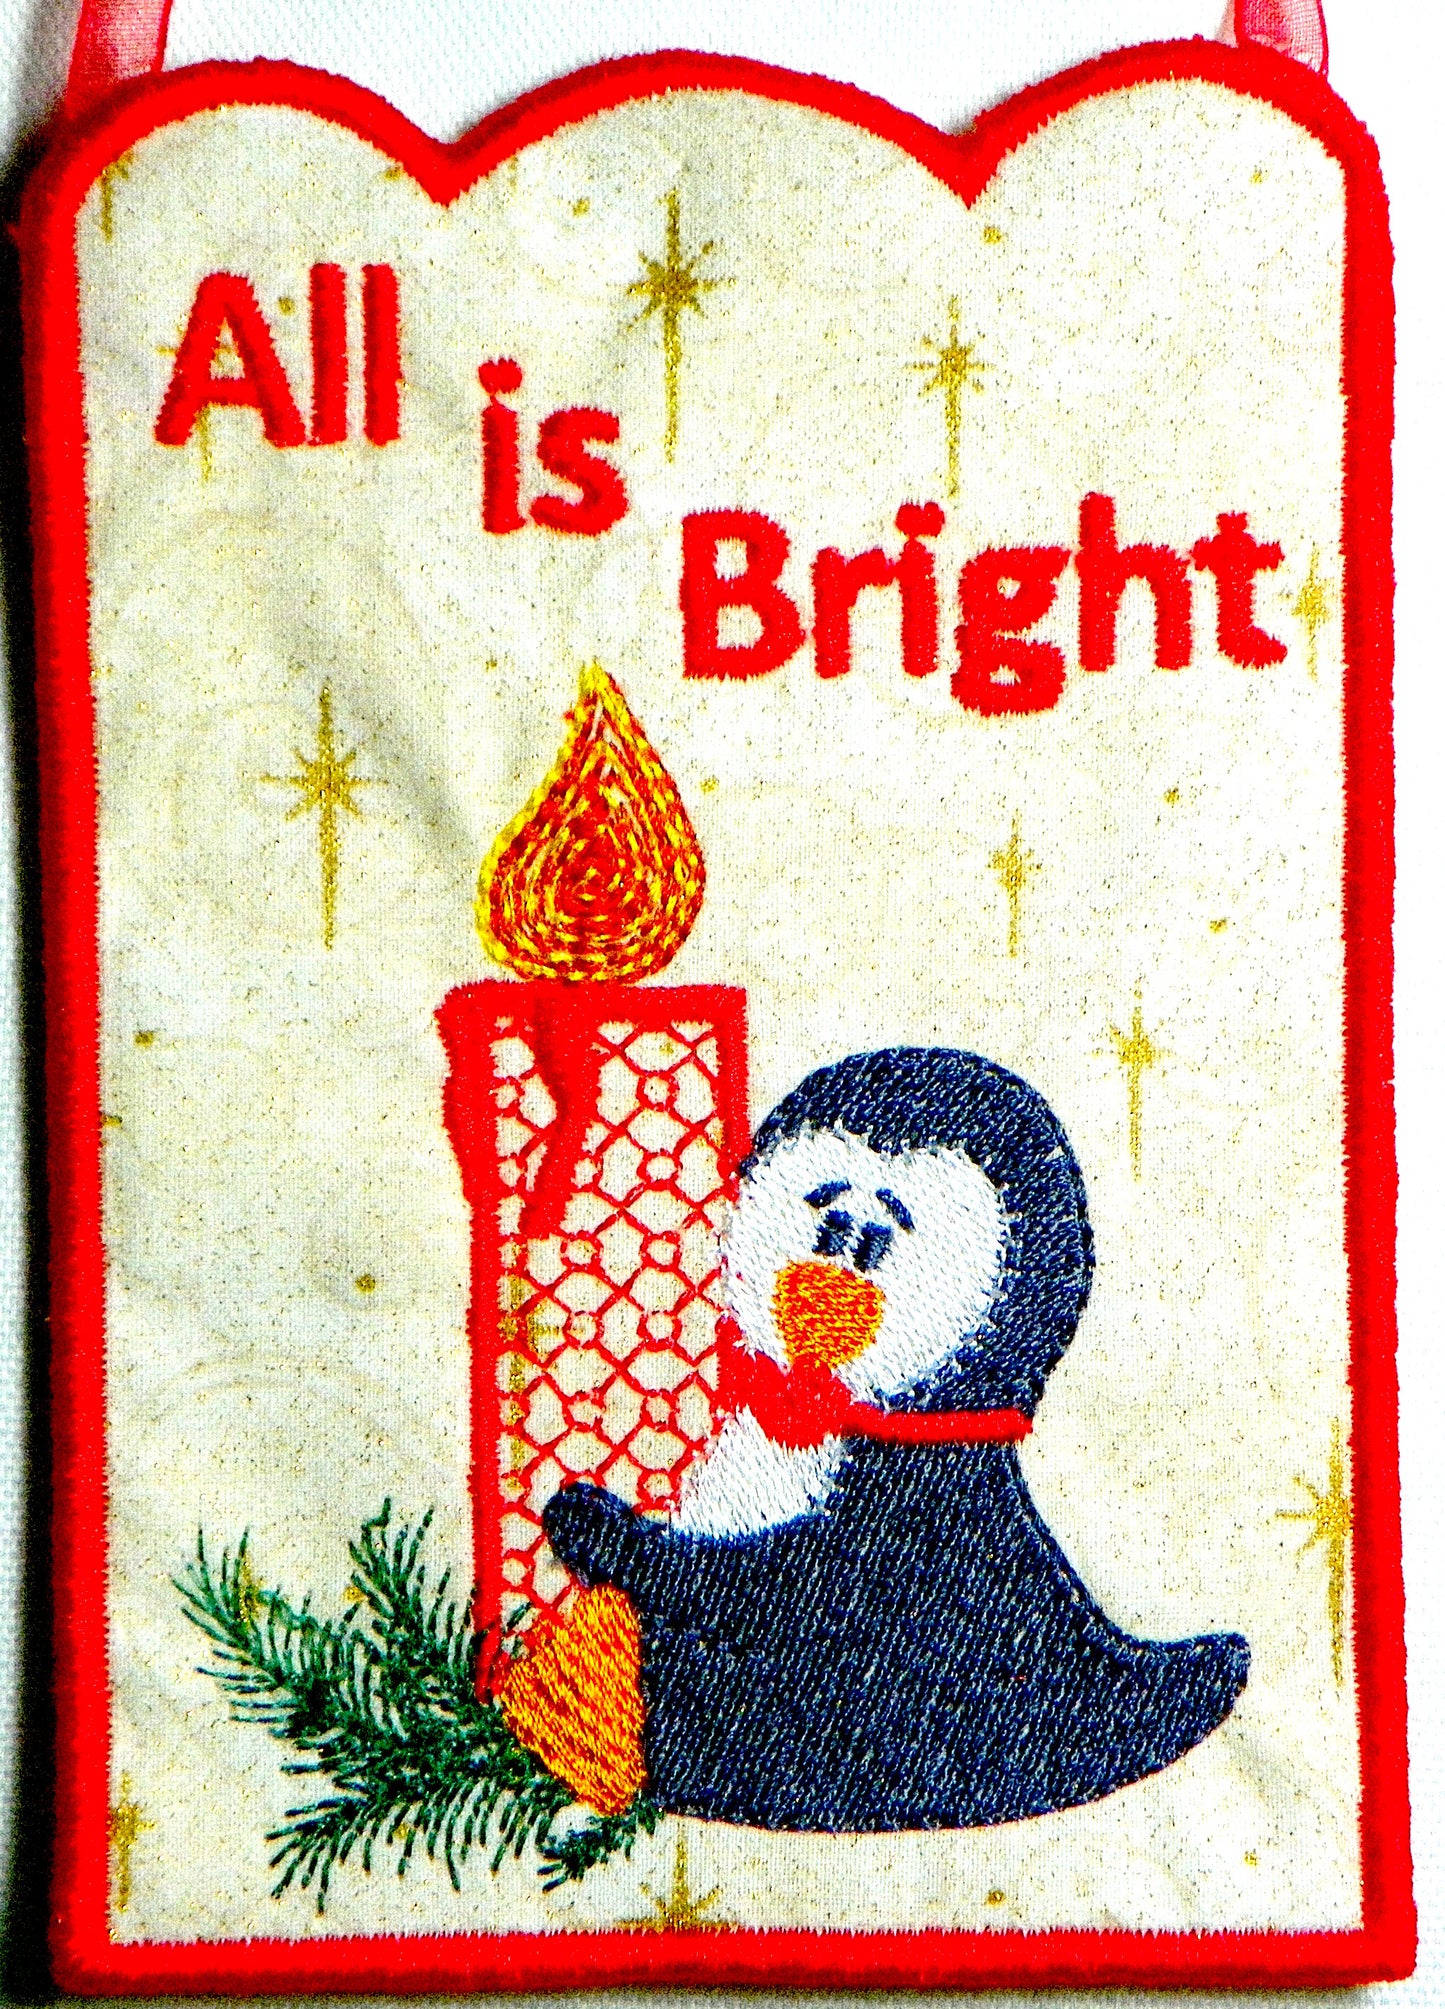 Holiday - Snowman Gift Card Holder - Fits a 4x4 Hoop - Instant  Downloadable Machine Embroidery - Light Fill Stitch - Tattered Stitch  Embroideries